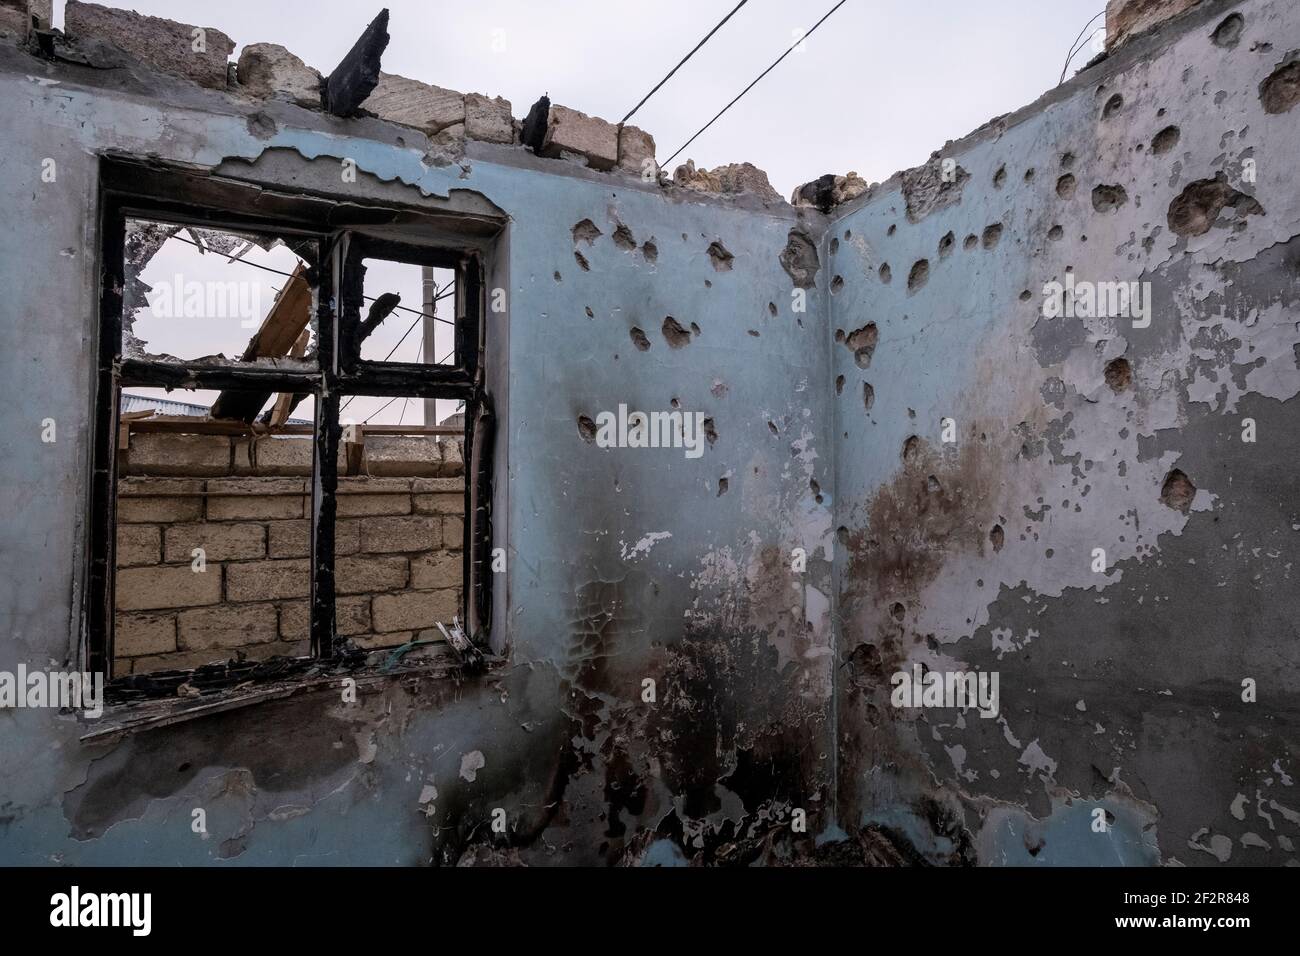 AGDAM DISTRICT, AZERBAIJAN - DECEMBER 14: Interior of a house partially destroyed after it was hit on 13 October by a rocket fired by Armenian forces in the village of Quzanli on December 14 2020 in Jabrayil Rayon of Azerbaijan. Heavy clashes erupted over Nagorno-Karabakh in late September during which more than 5,600 people, including civilians, were killed. The sides agreed to a Russia-brokered cease-fire deal that took effect on November 10, resulting in Azerbaijan regaining control over swaths of territory ethnic Armenians had administered for almost 30 years. Stock Photo